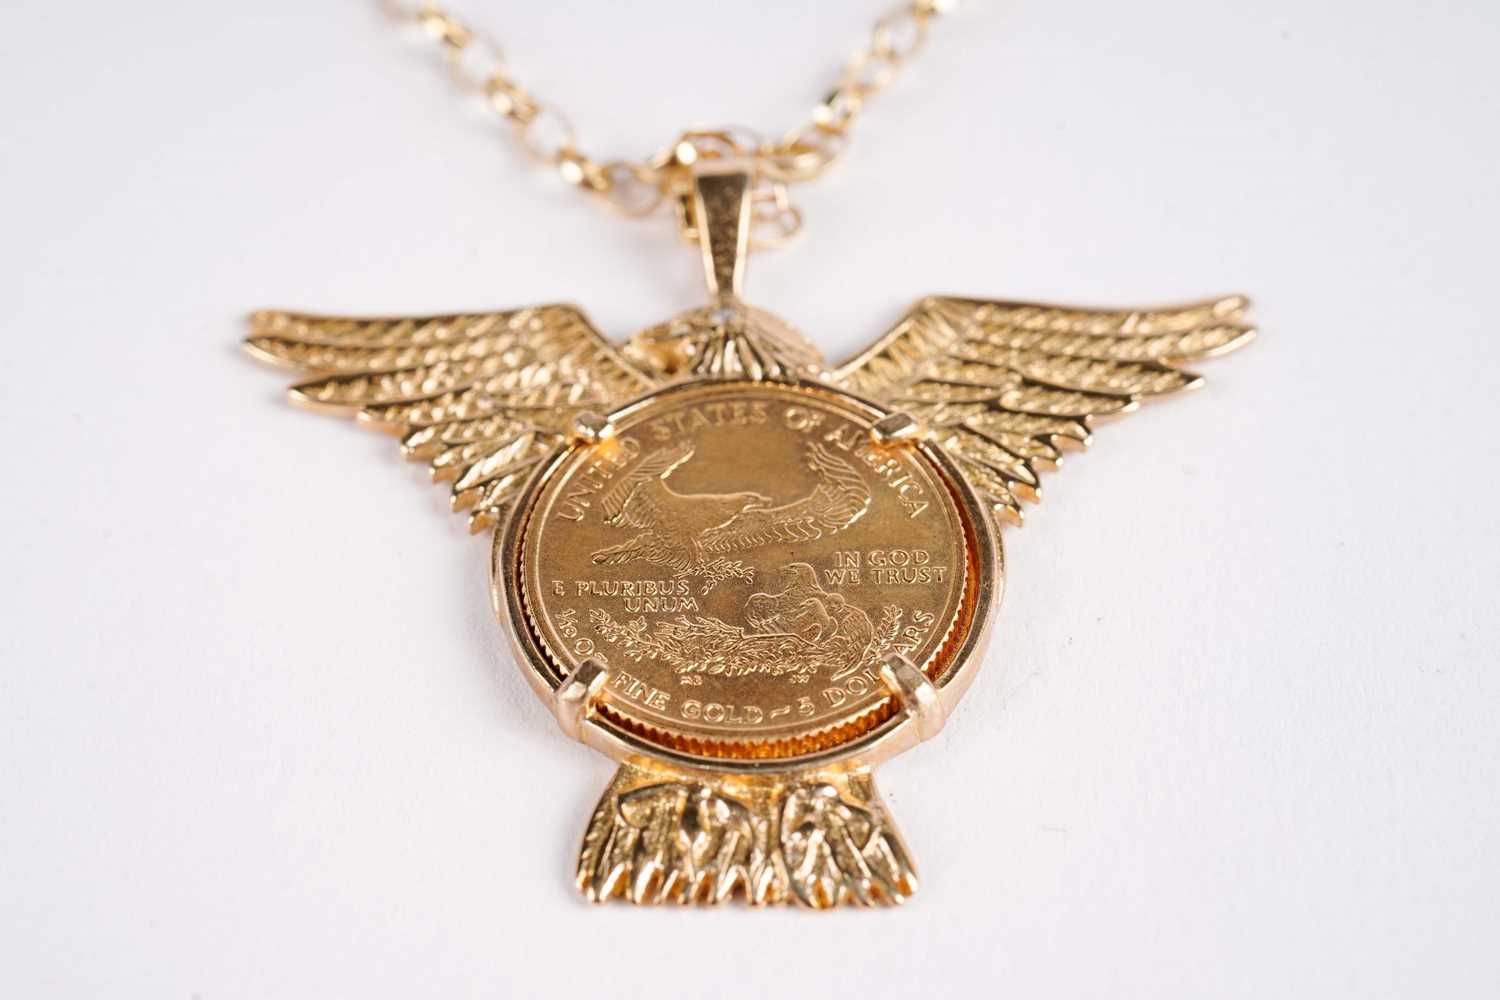 USA $5 dollar coin in pendant mount, on chain - Image 3 of 3